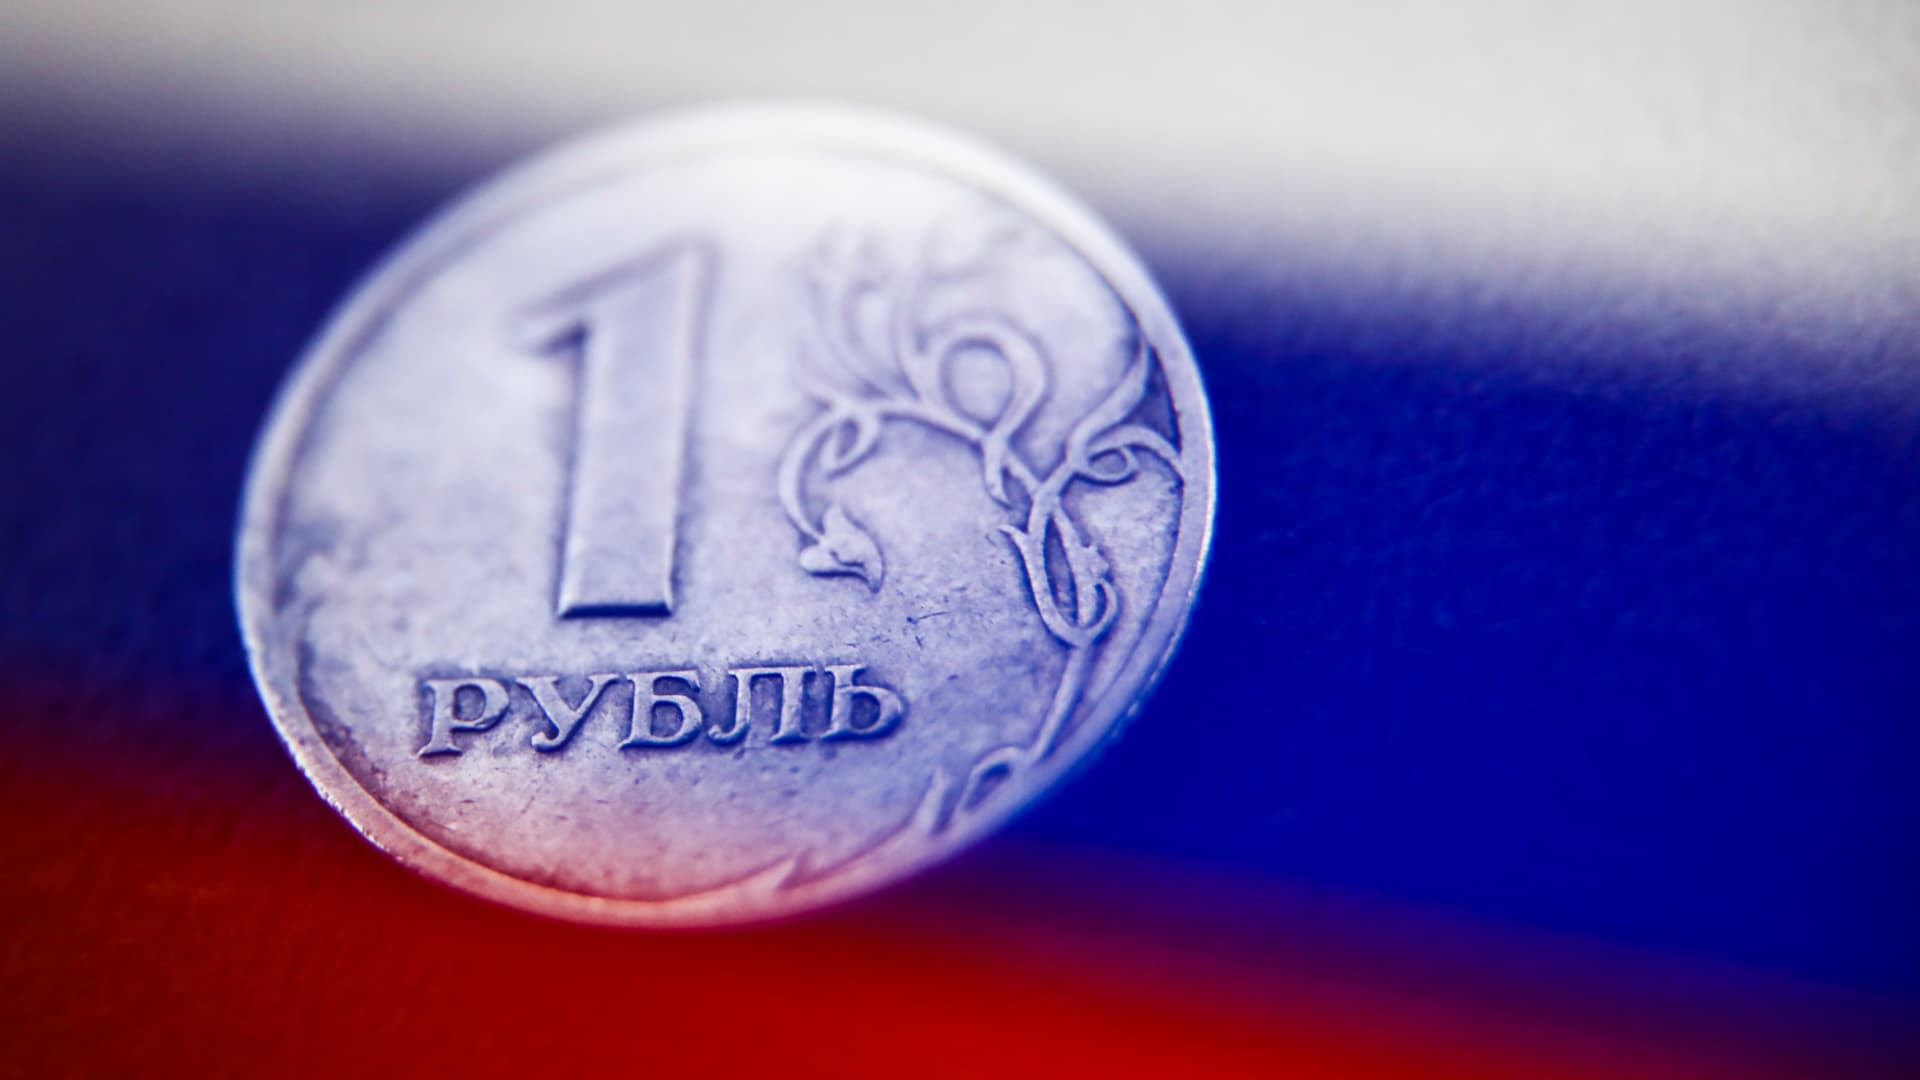 Russia’s ruble is at its strongest level in 7 years despite massive sanctions. Here’s why